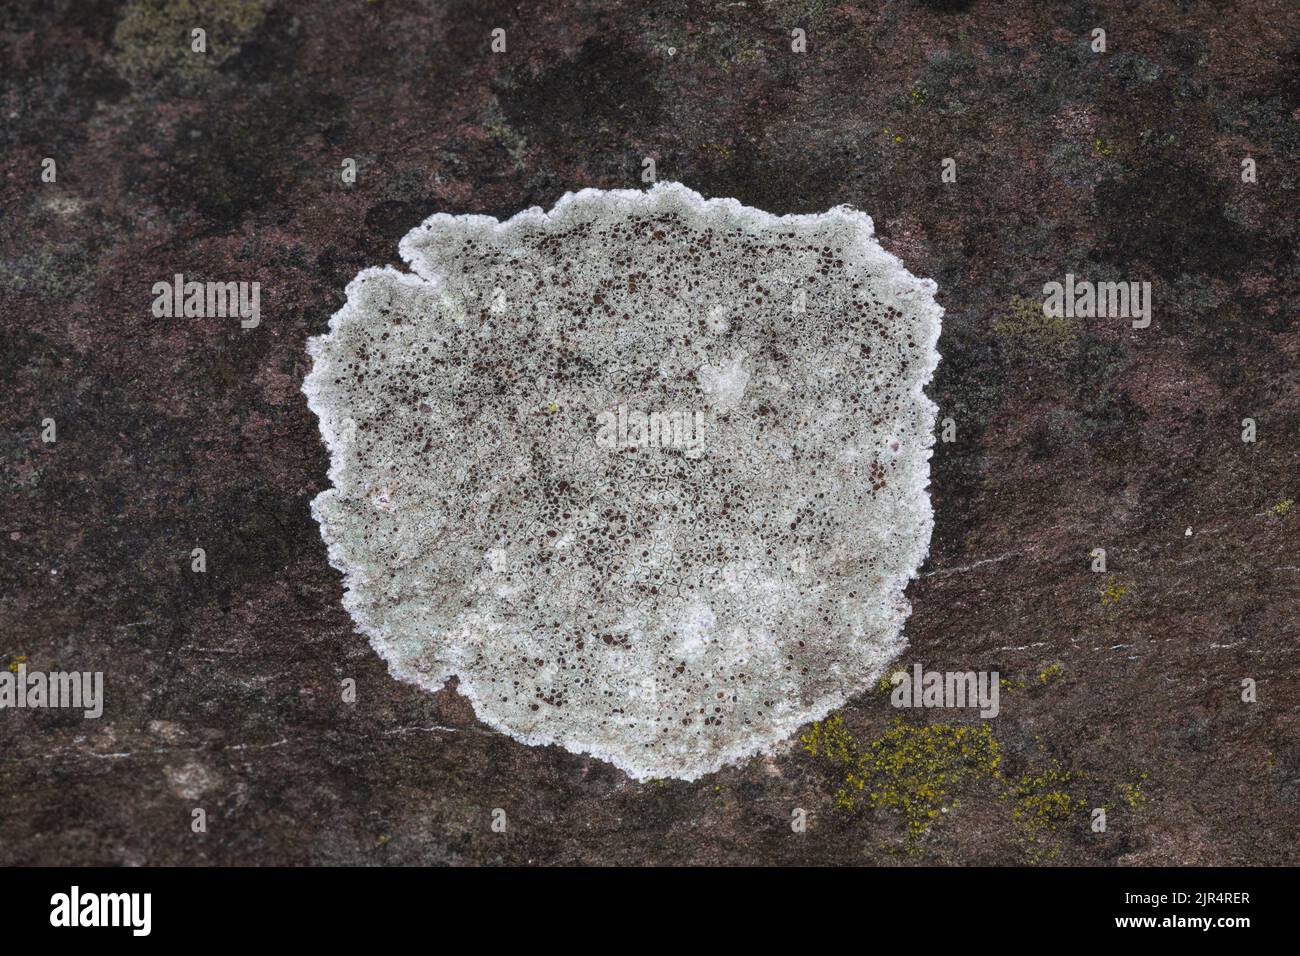 Crustose lichen (Lecanora campestris), grows on a wall, Germany Stock Photo